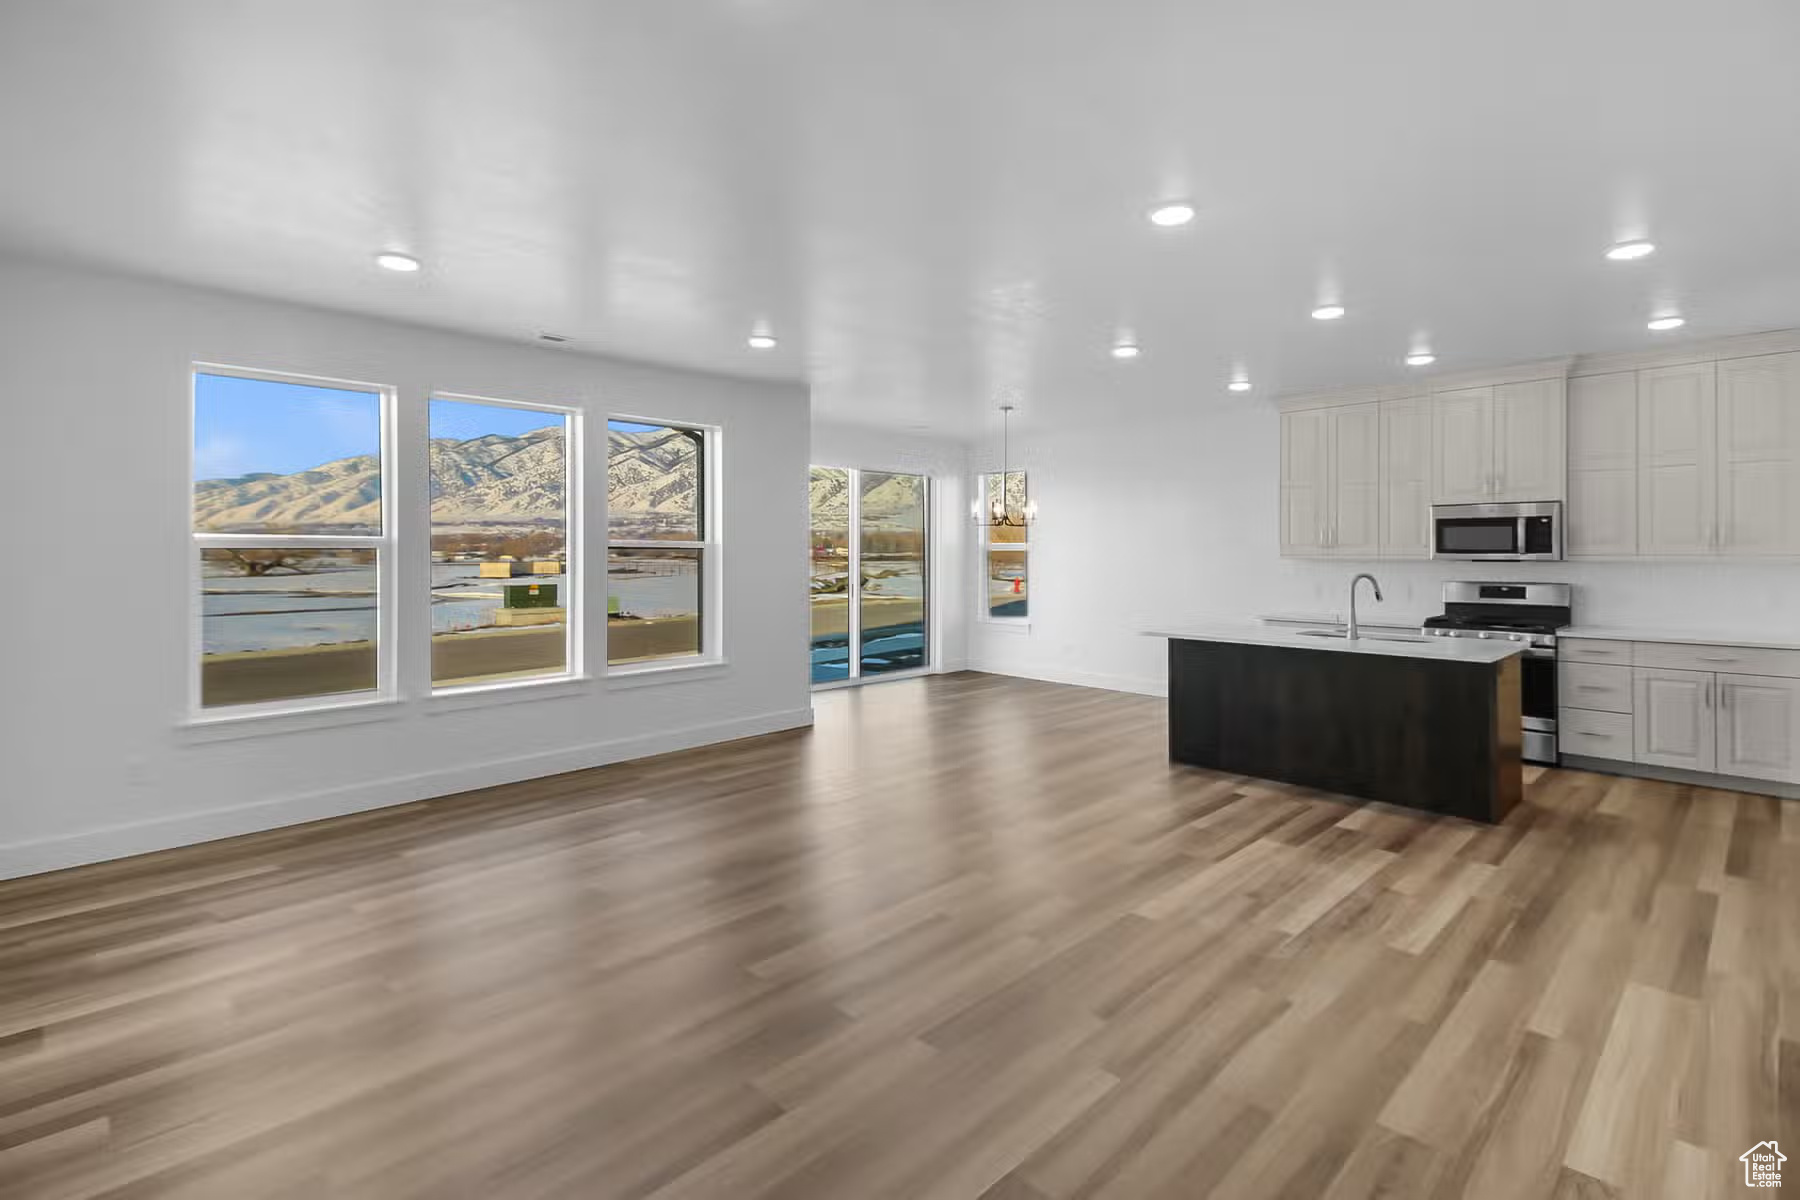 Kitchen with a wealth of natural light, appliances with stainless steel finishes, light hardwood / wood-style floors, and a kitchen island with sink